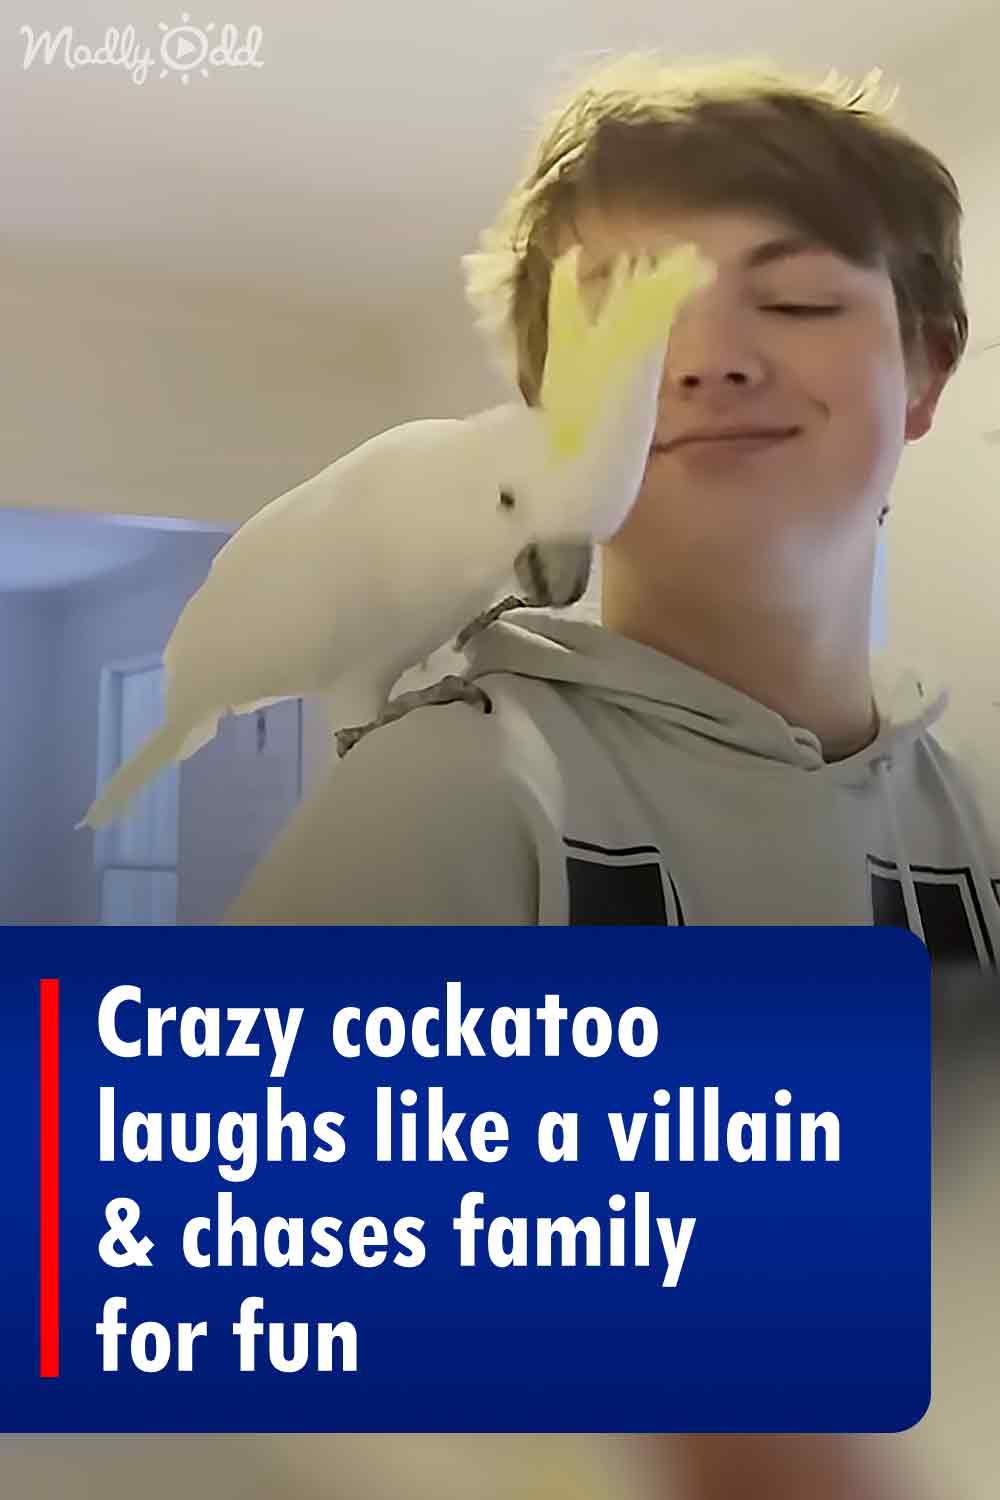 Crazy cockatoo laughs like a villain & chases family for fun